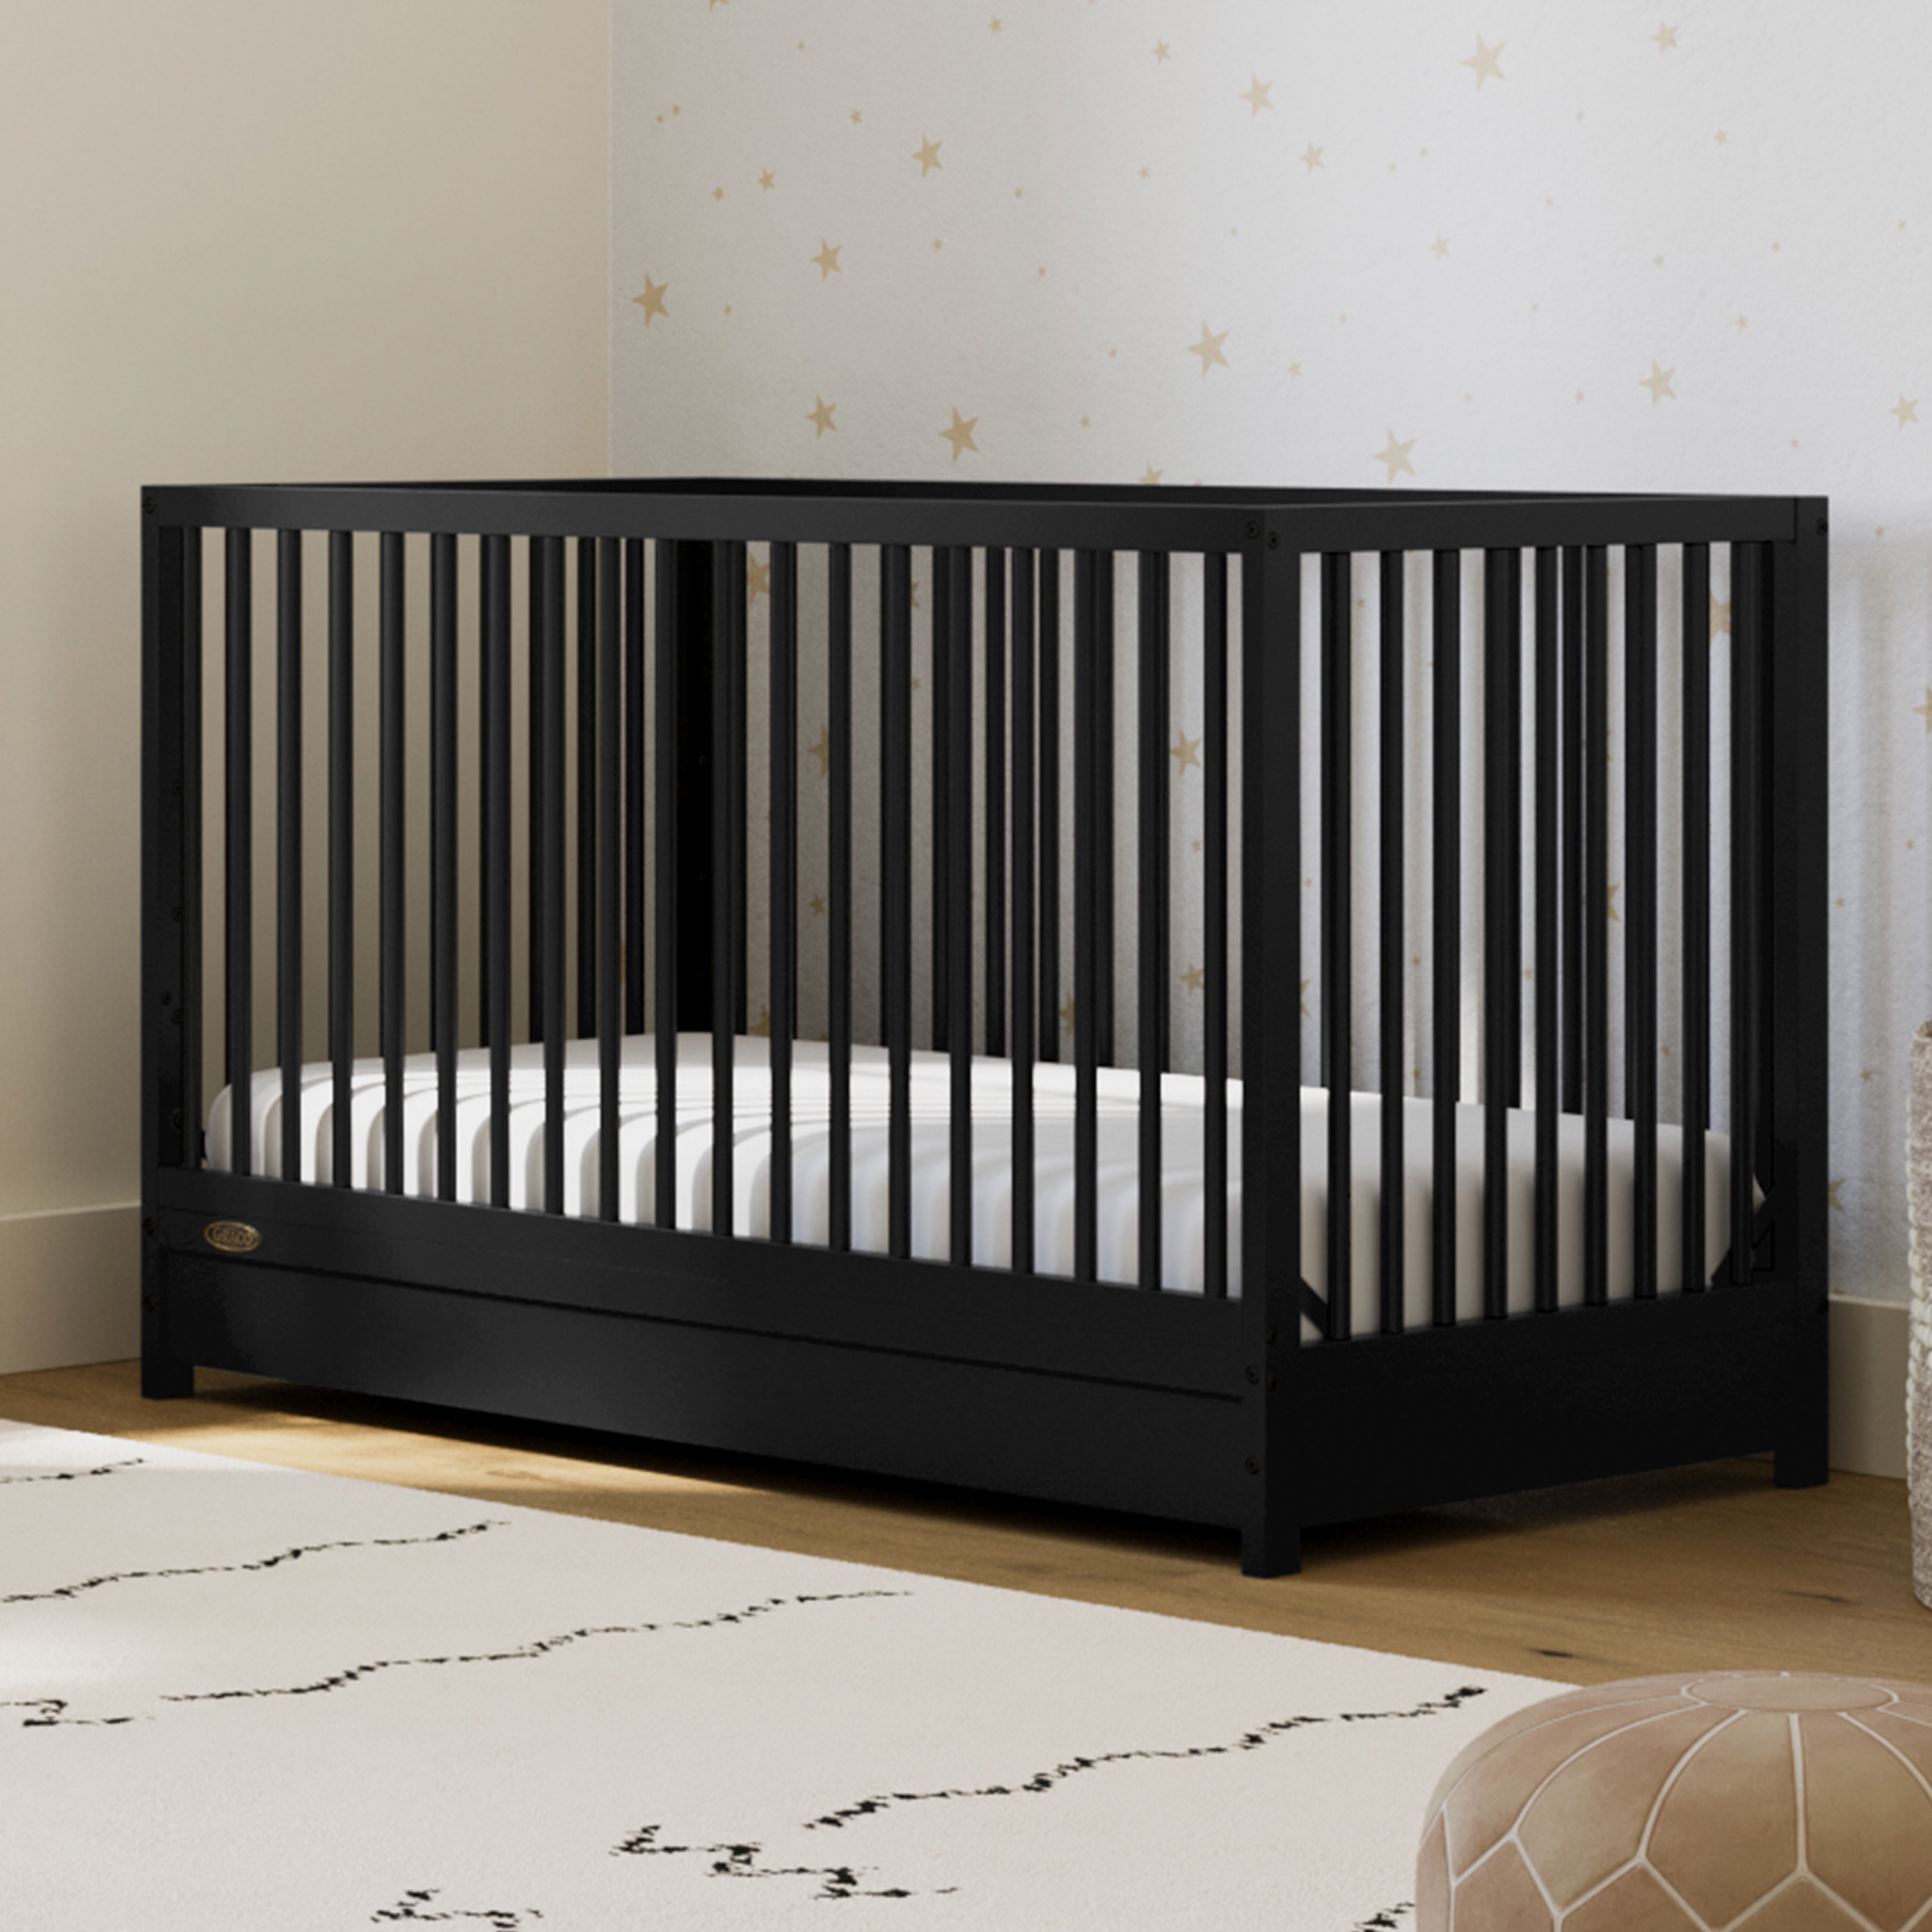 Graco Teddi 5-in-1 Convertible Baby Crib with Drawer, Black - image 2 of 16